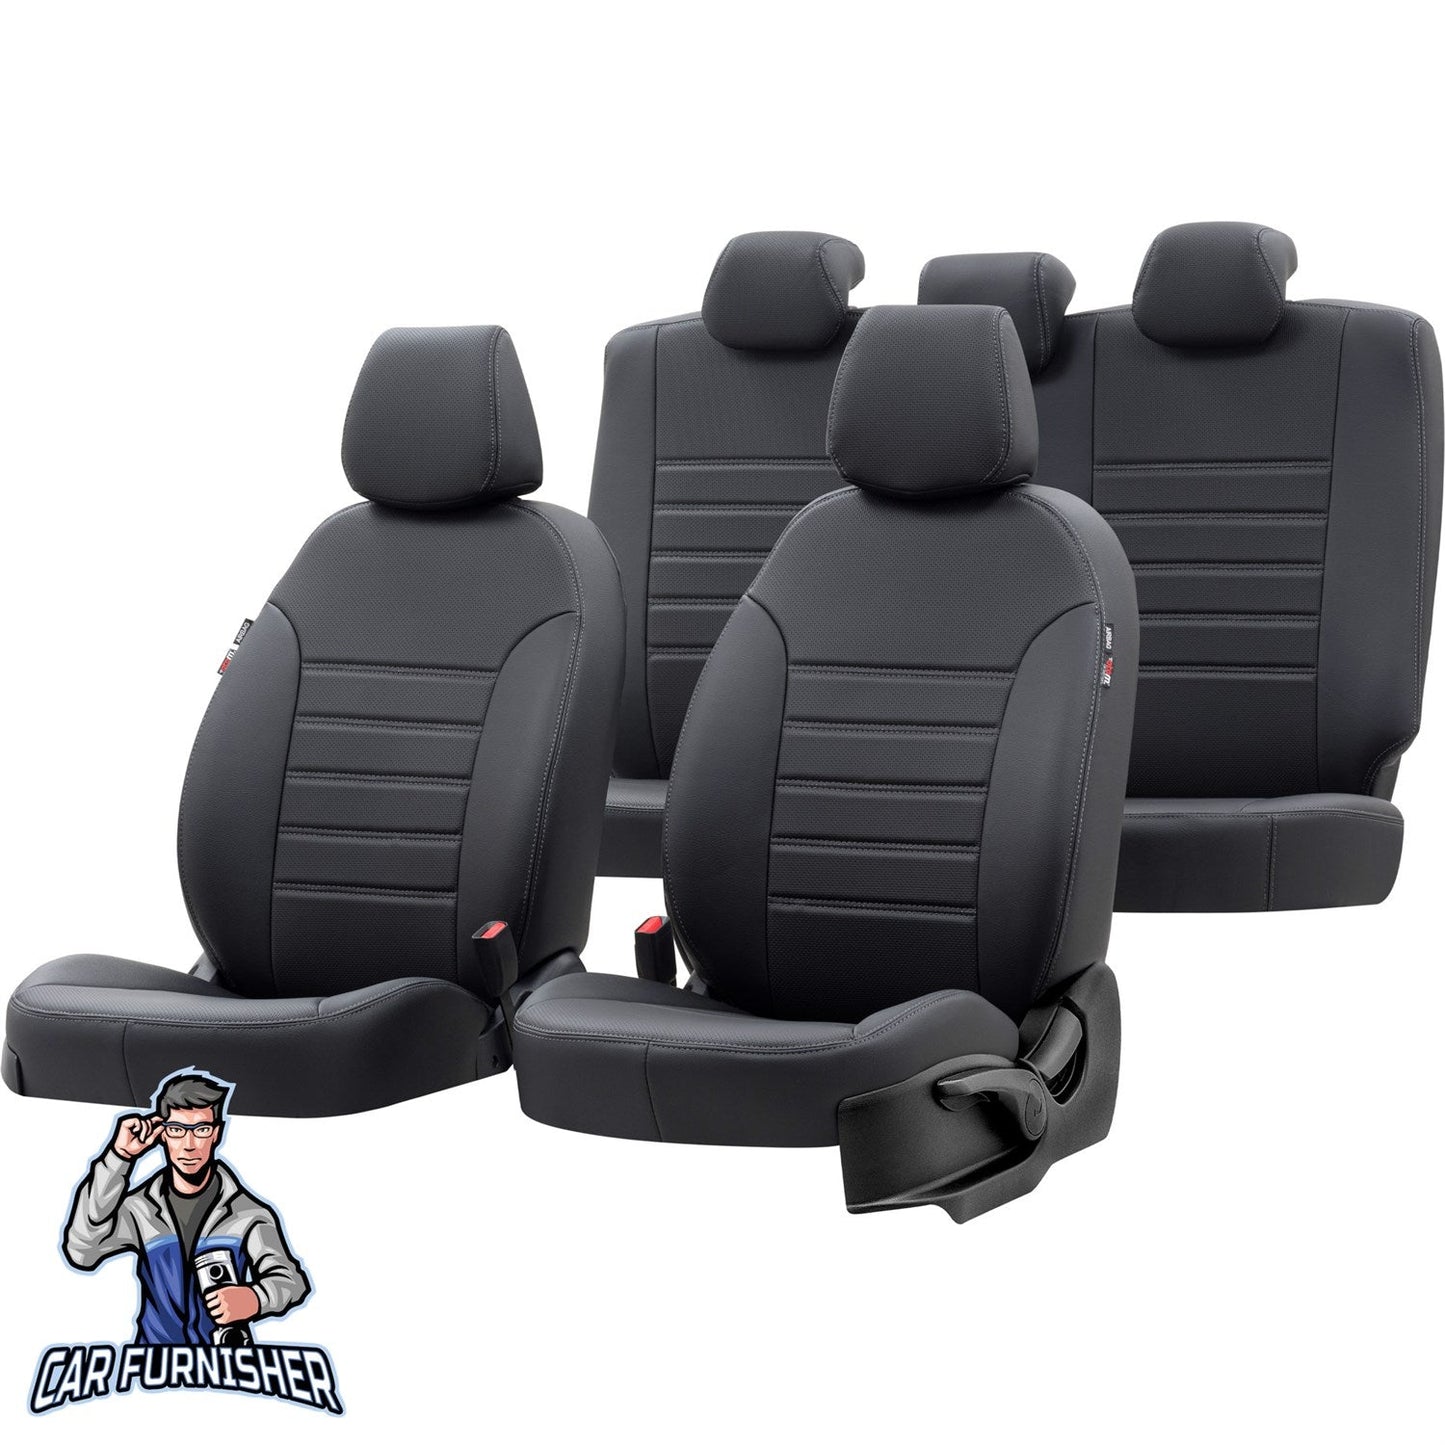 Mercedes C Class Seat Covers New York Leather Design Black Leather